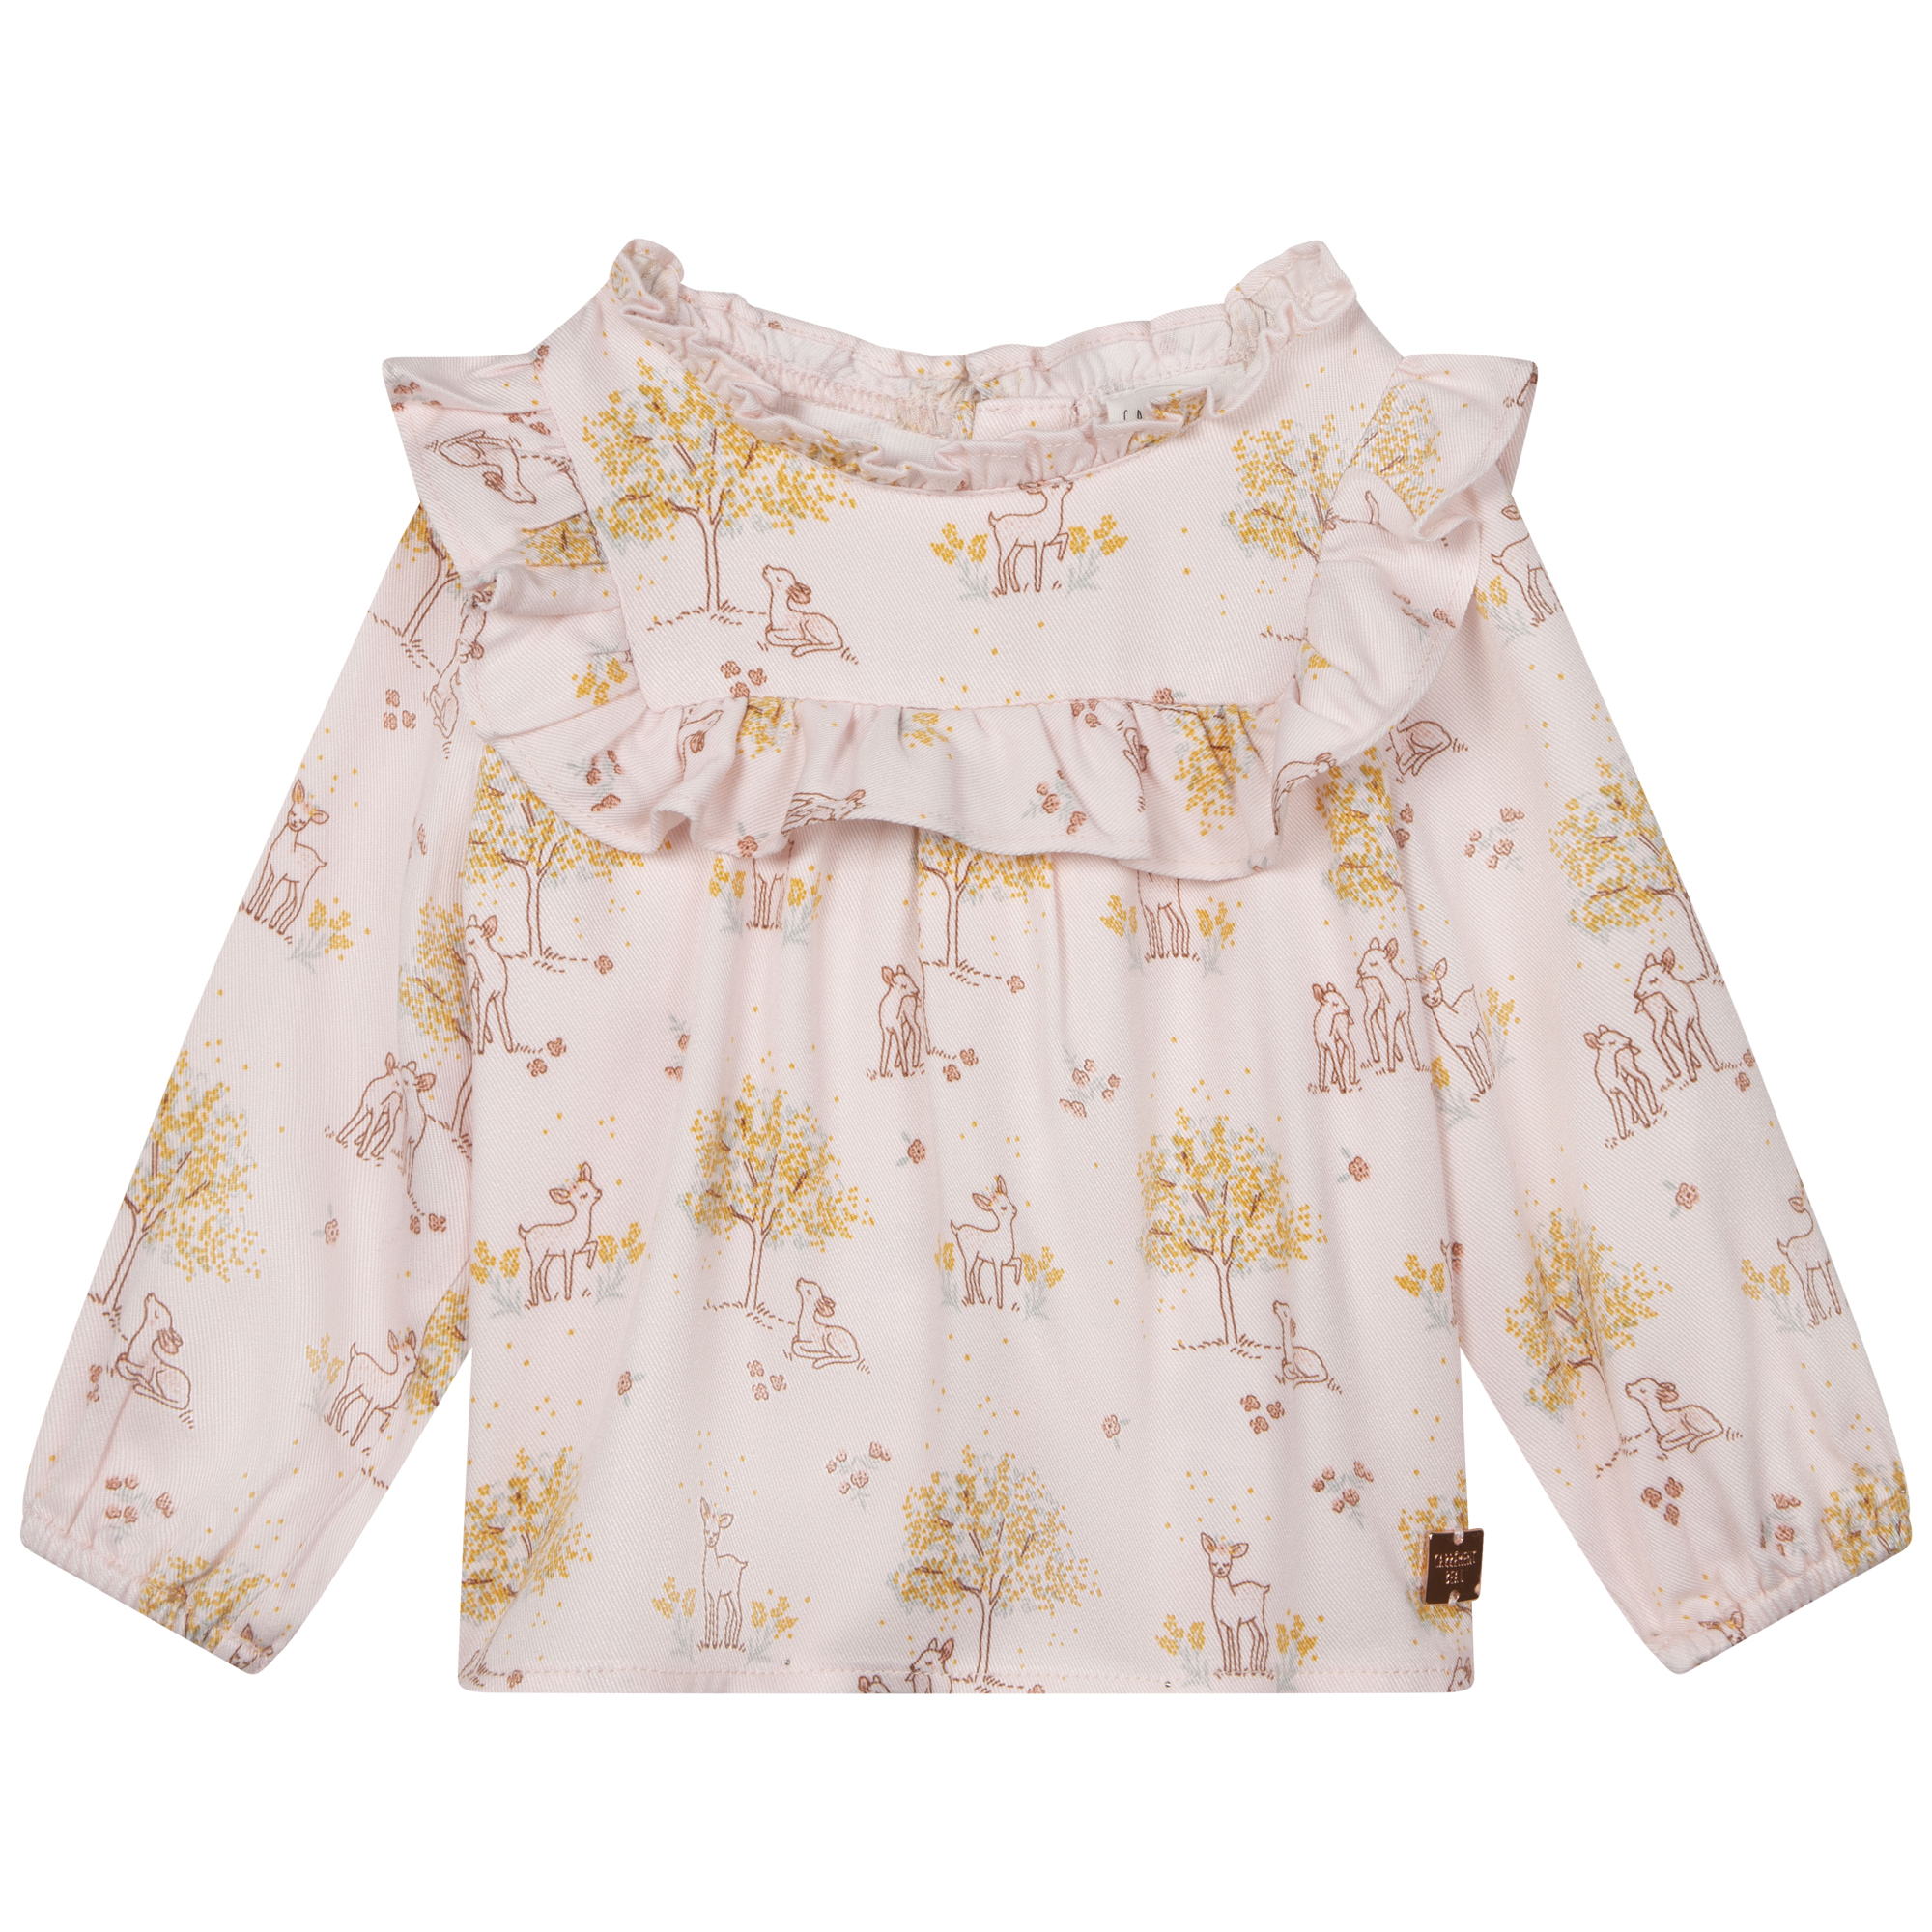 Printed serge blouse CARREMENT BEAU for GIRL